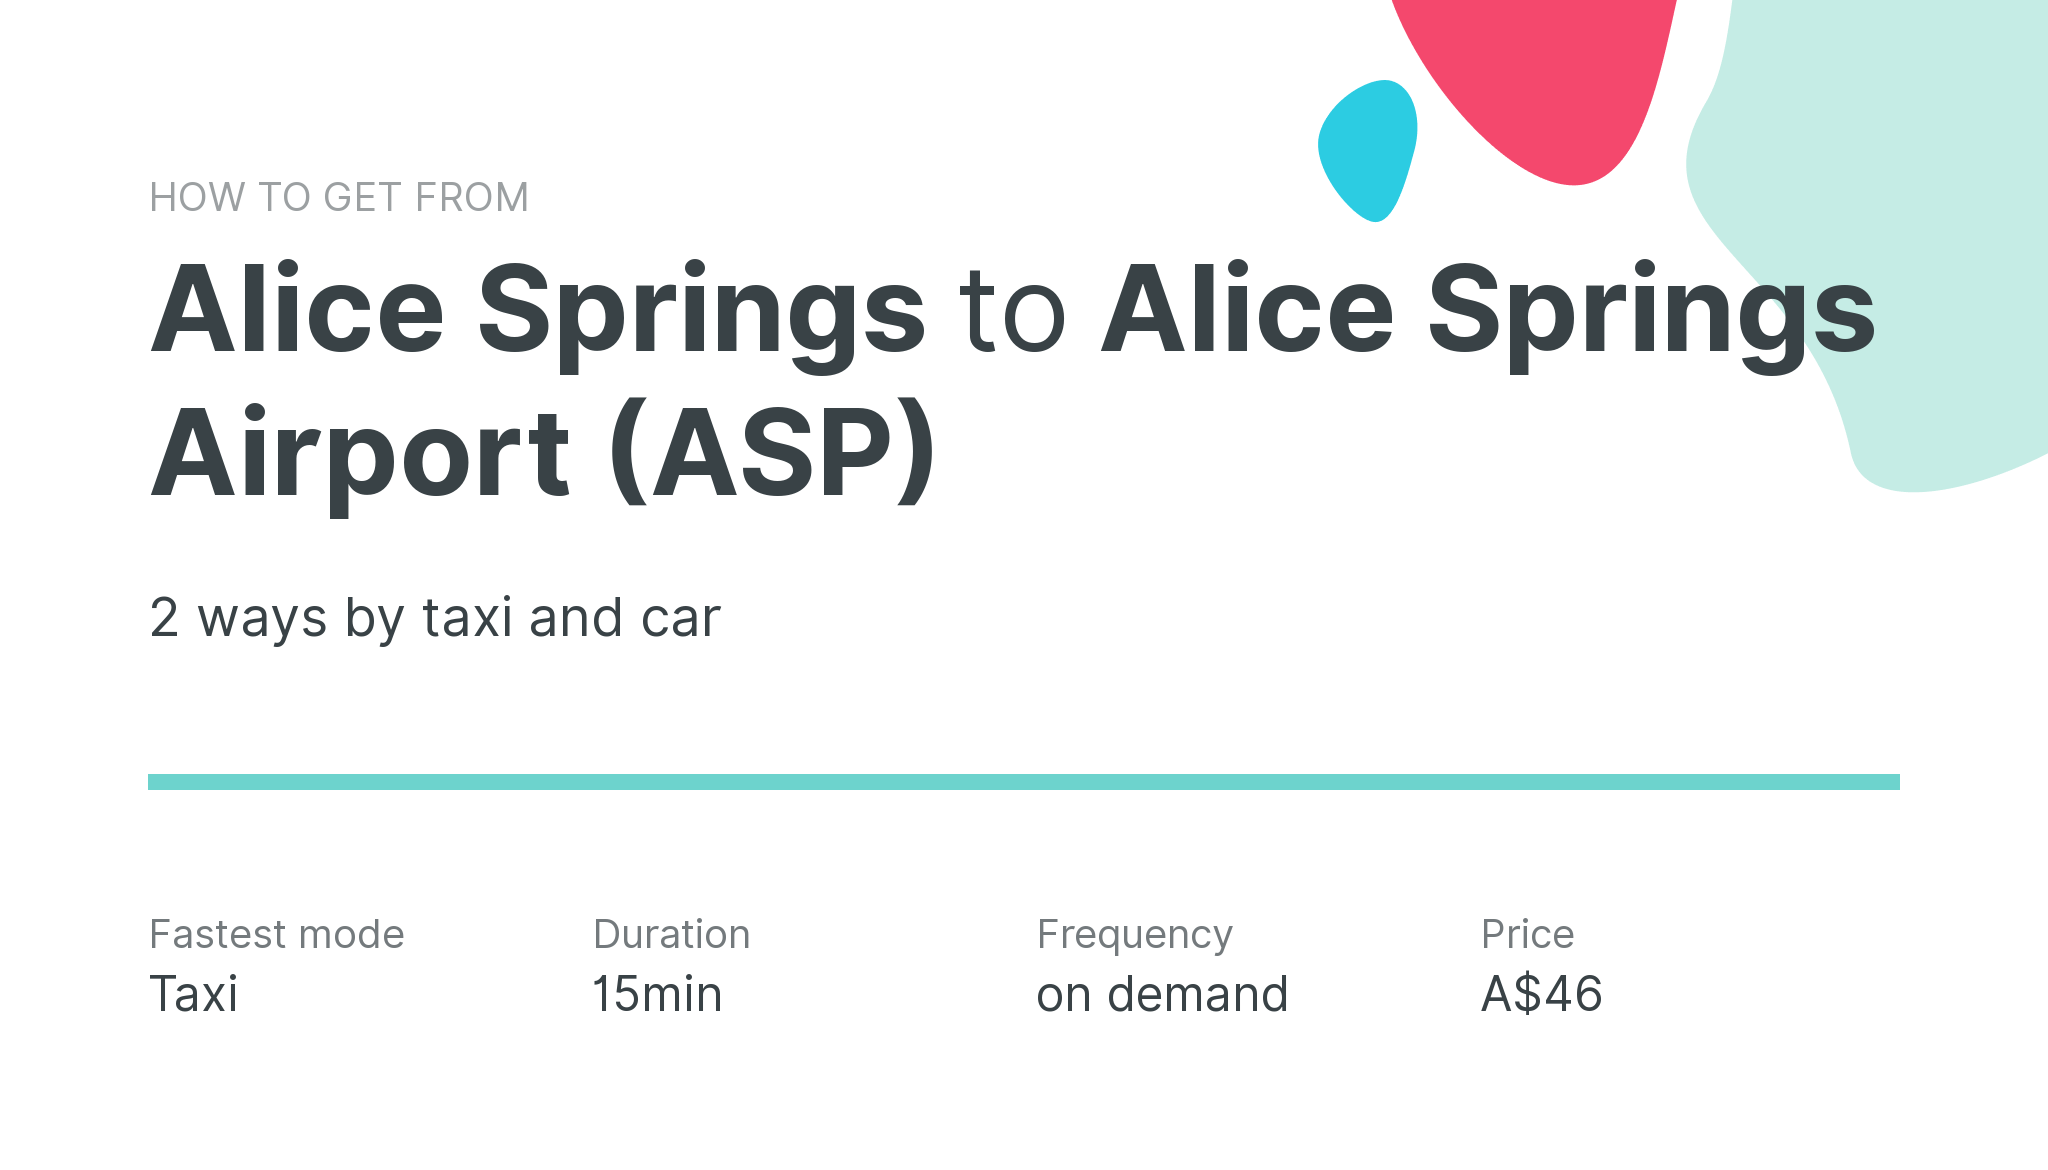 How do I get from Alice Springs to Alice Springs Airport (ASP)